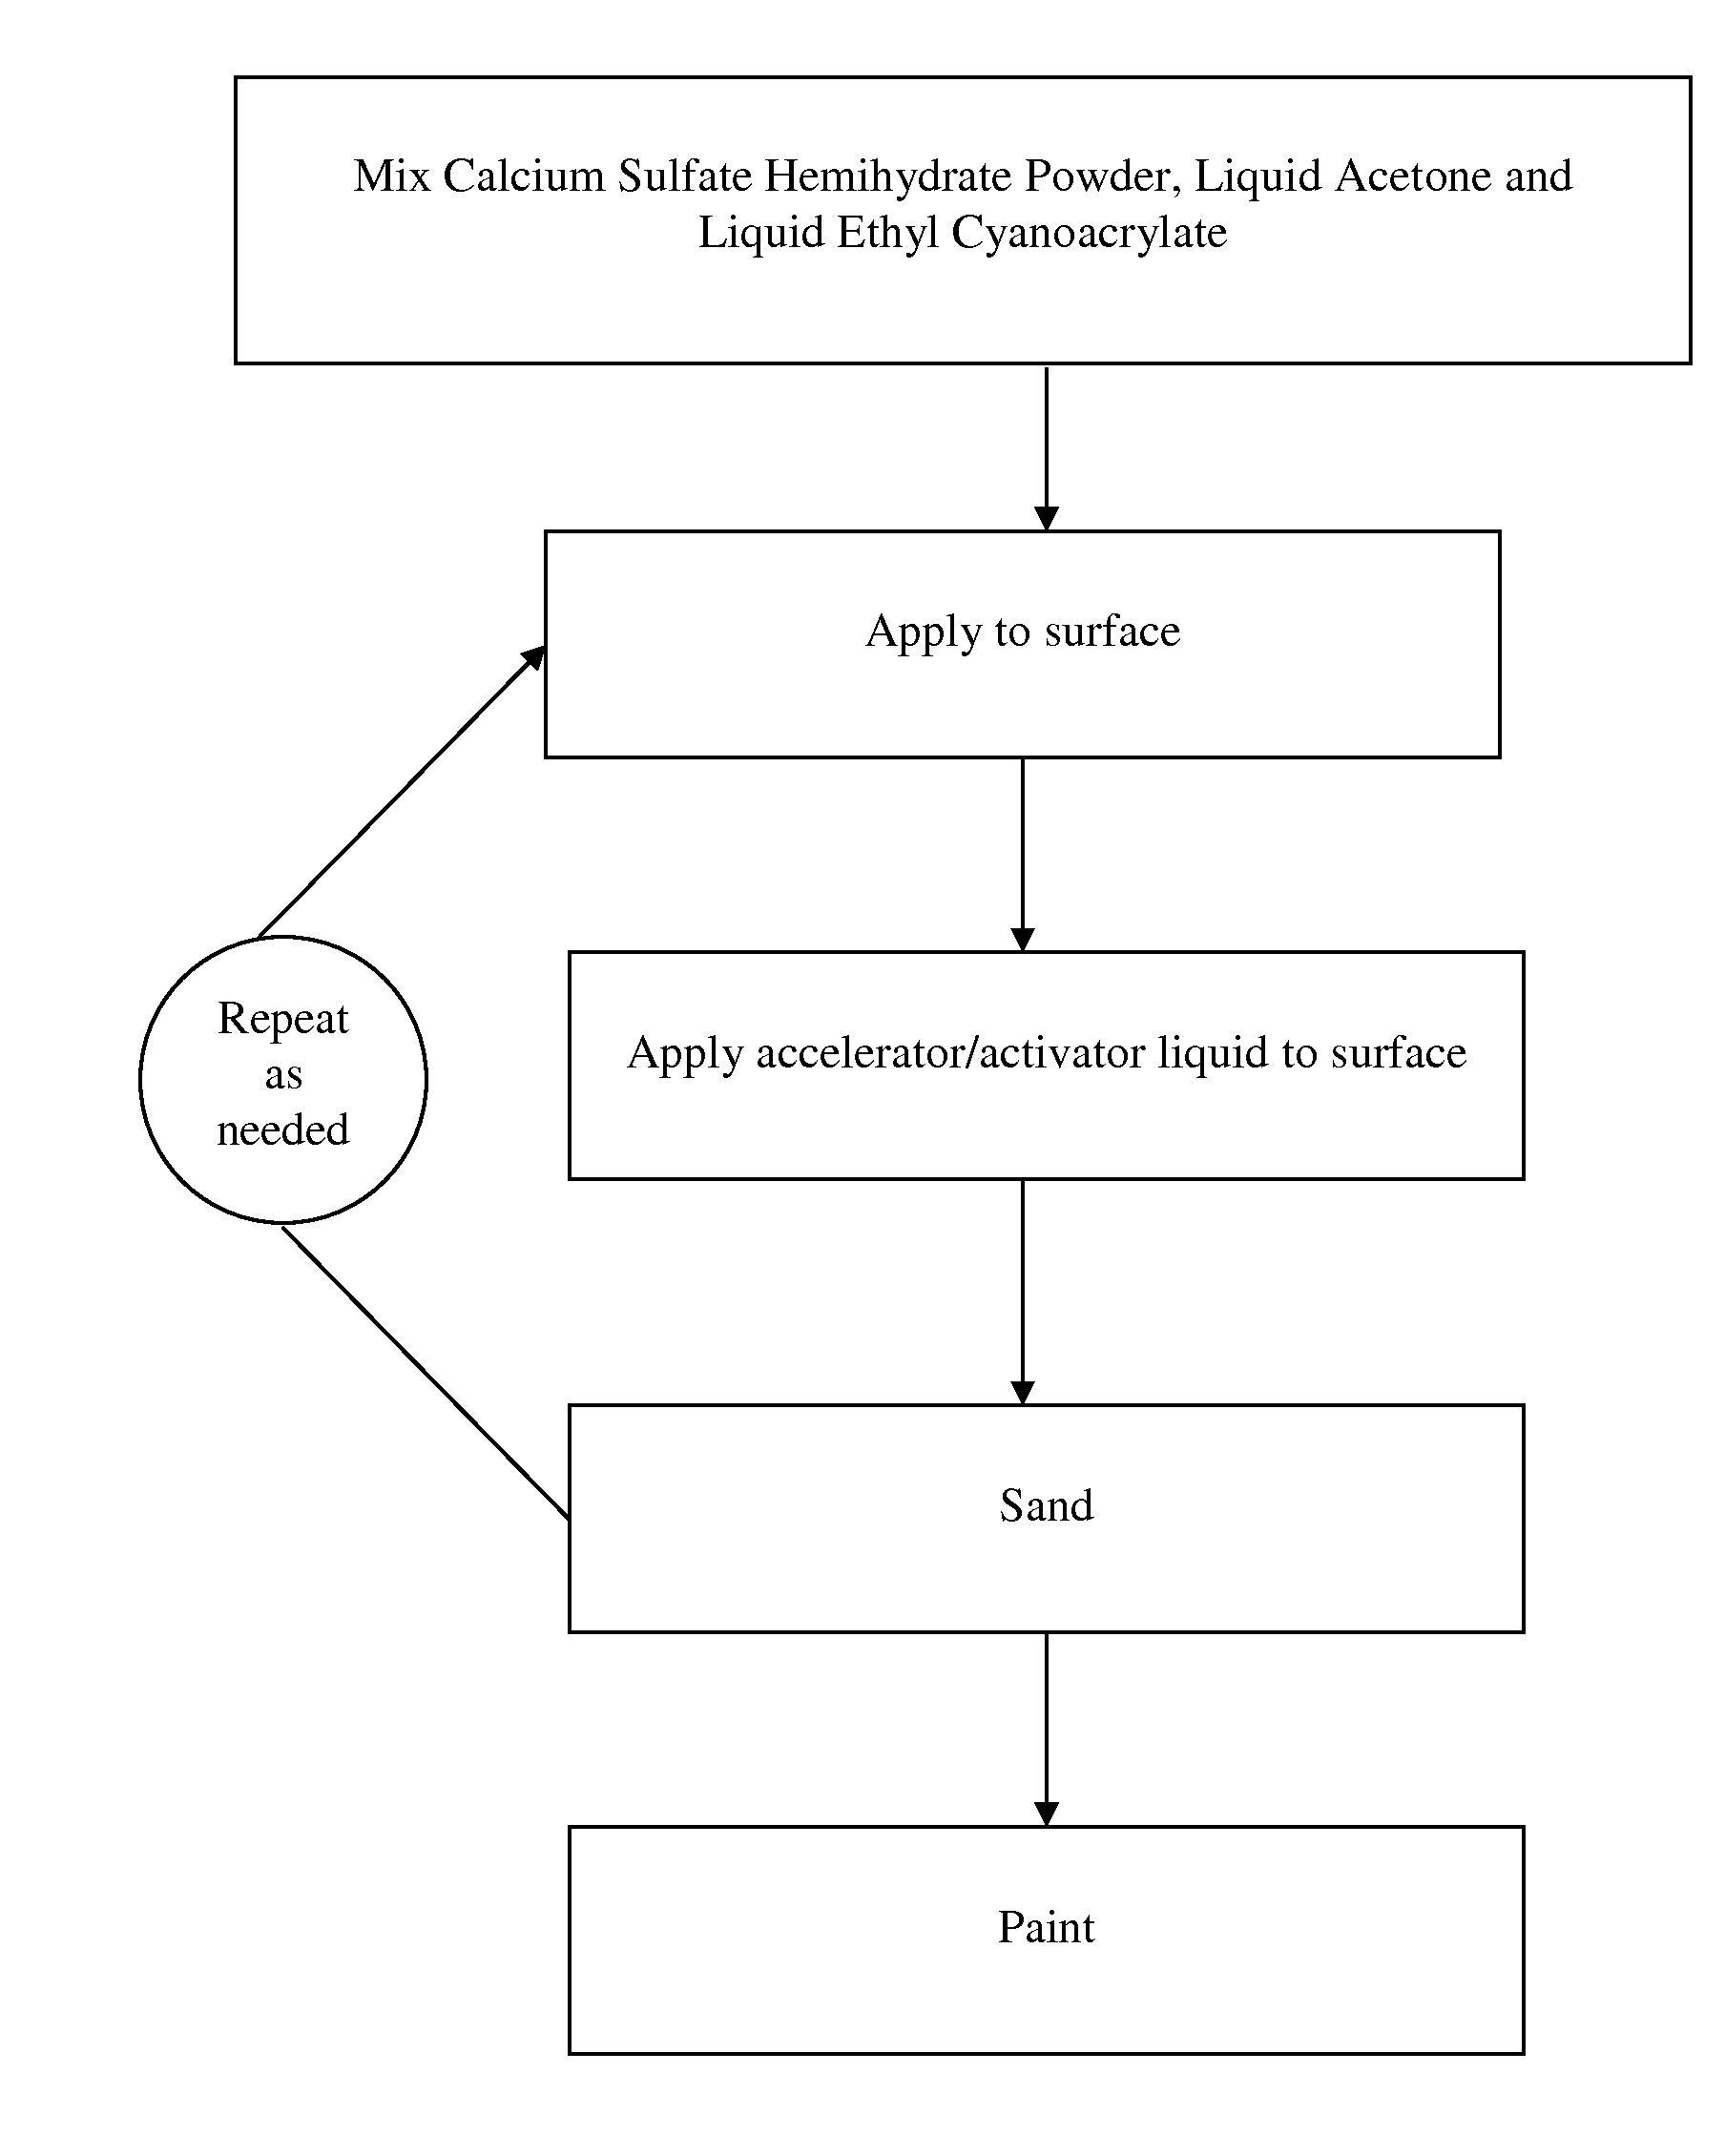 Non-aqueous rapid setting drywall compound and method of use